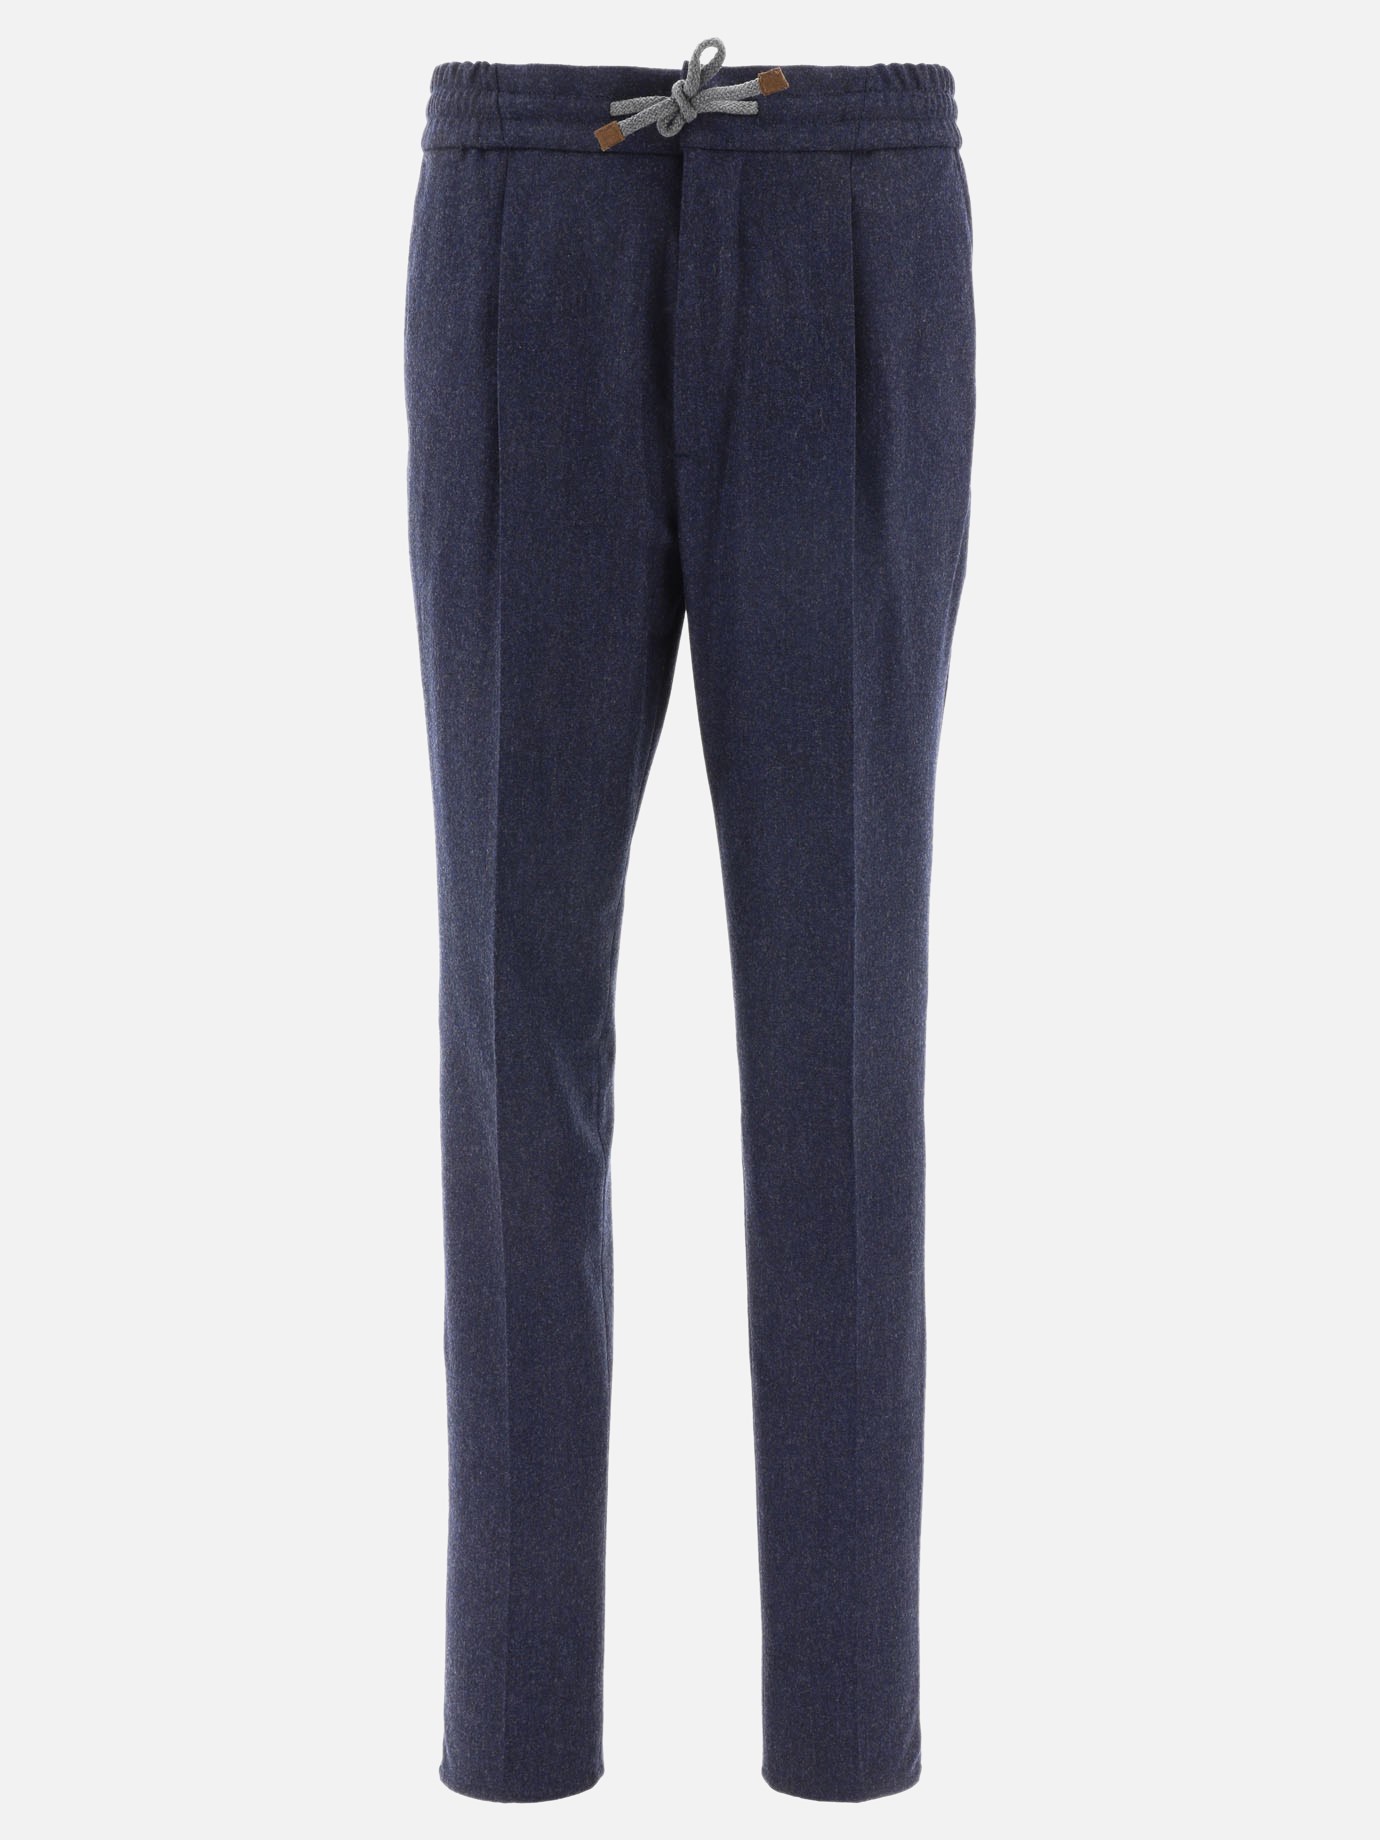 Tailored trousers with drawstrings